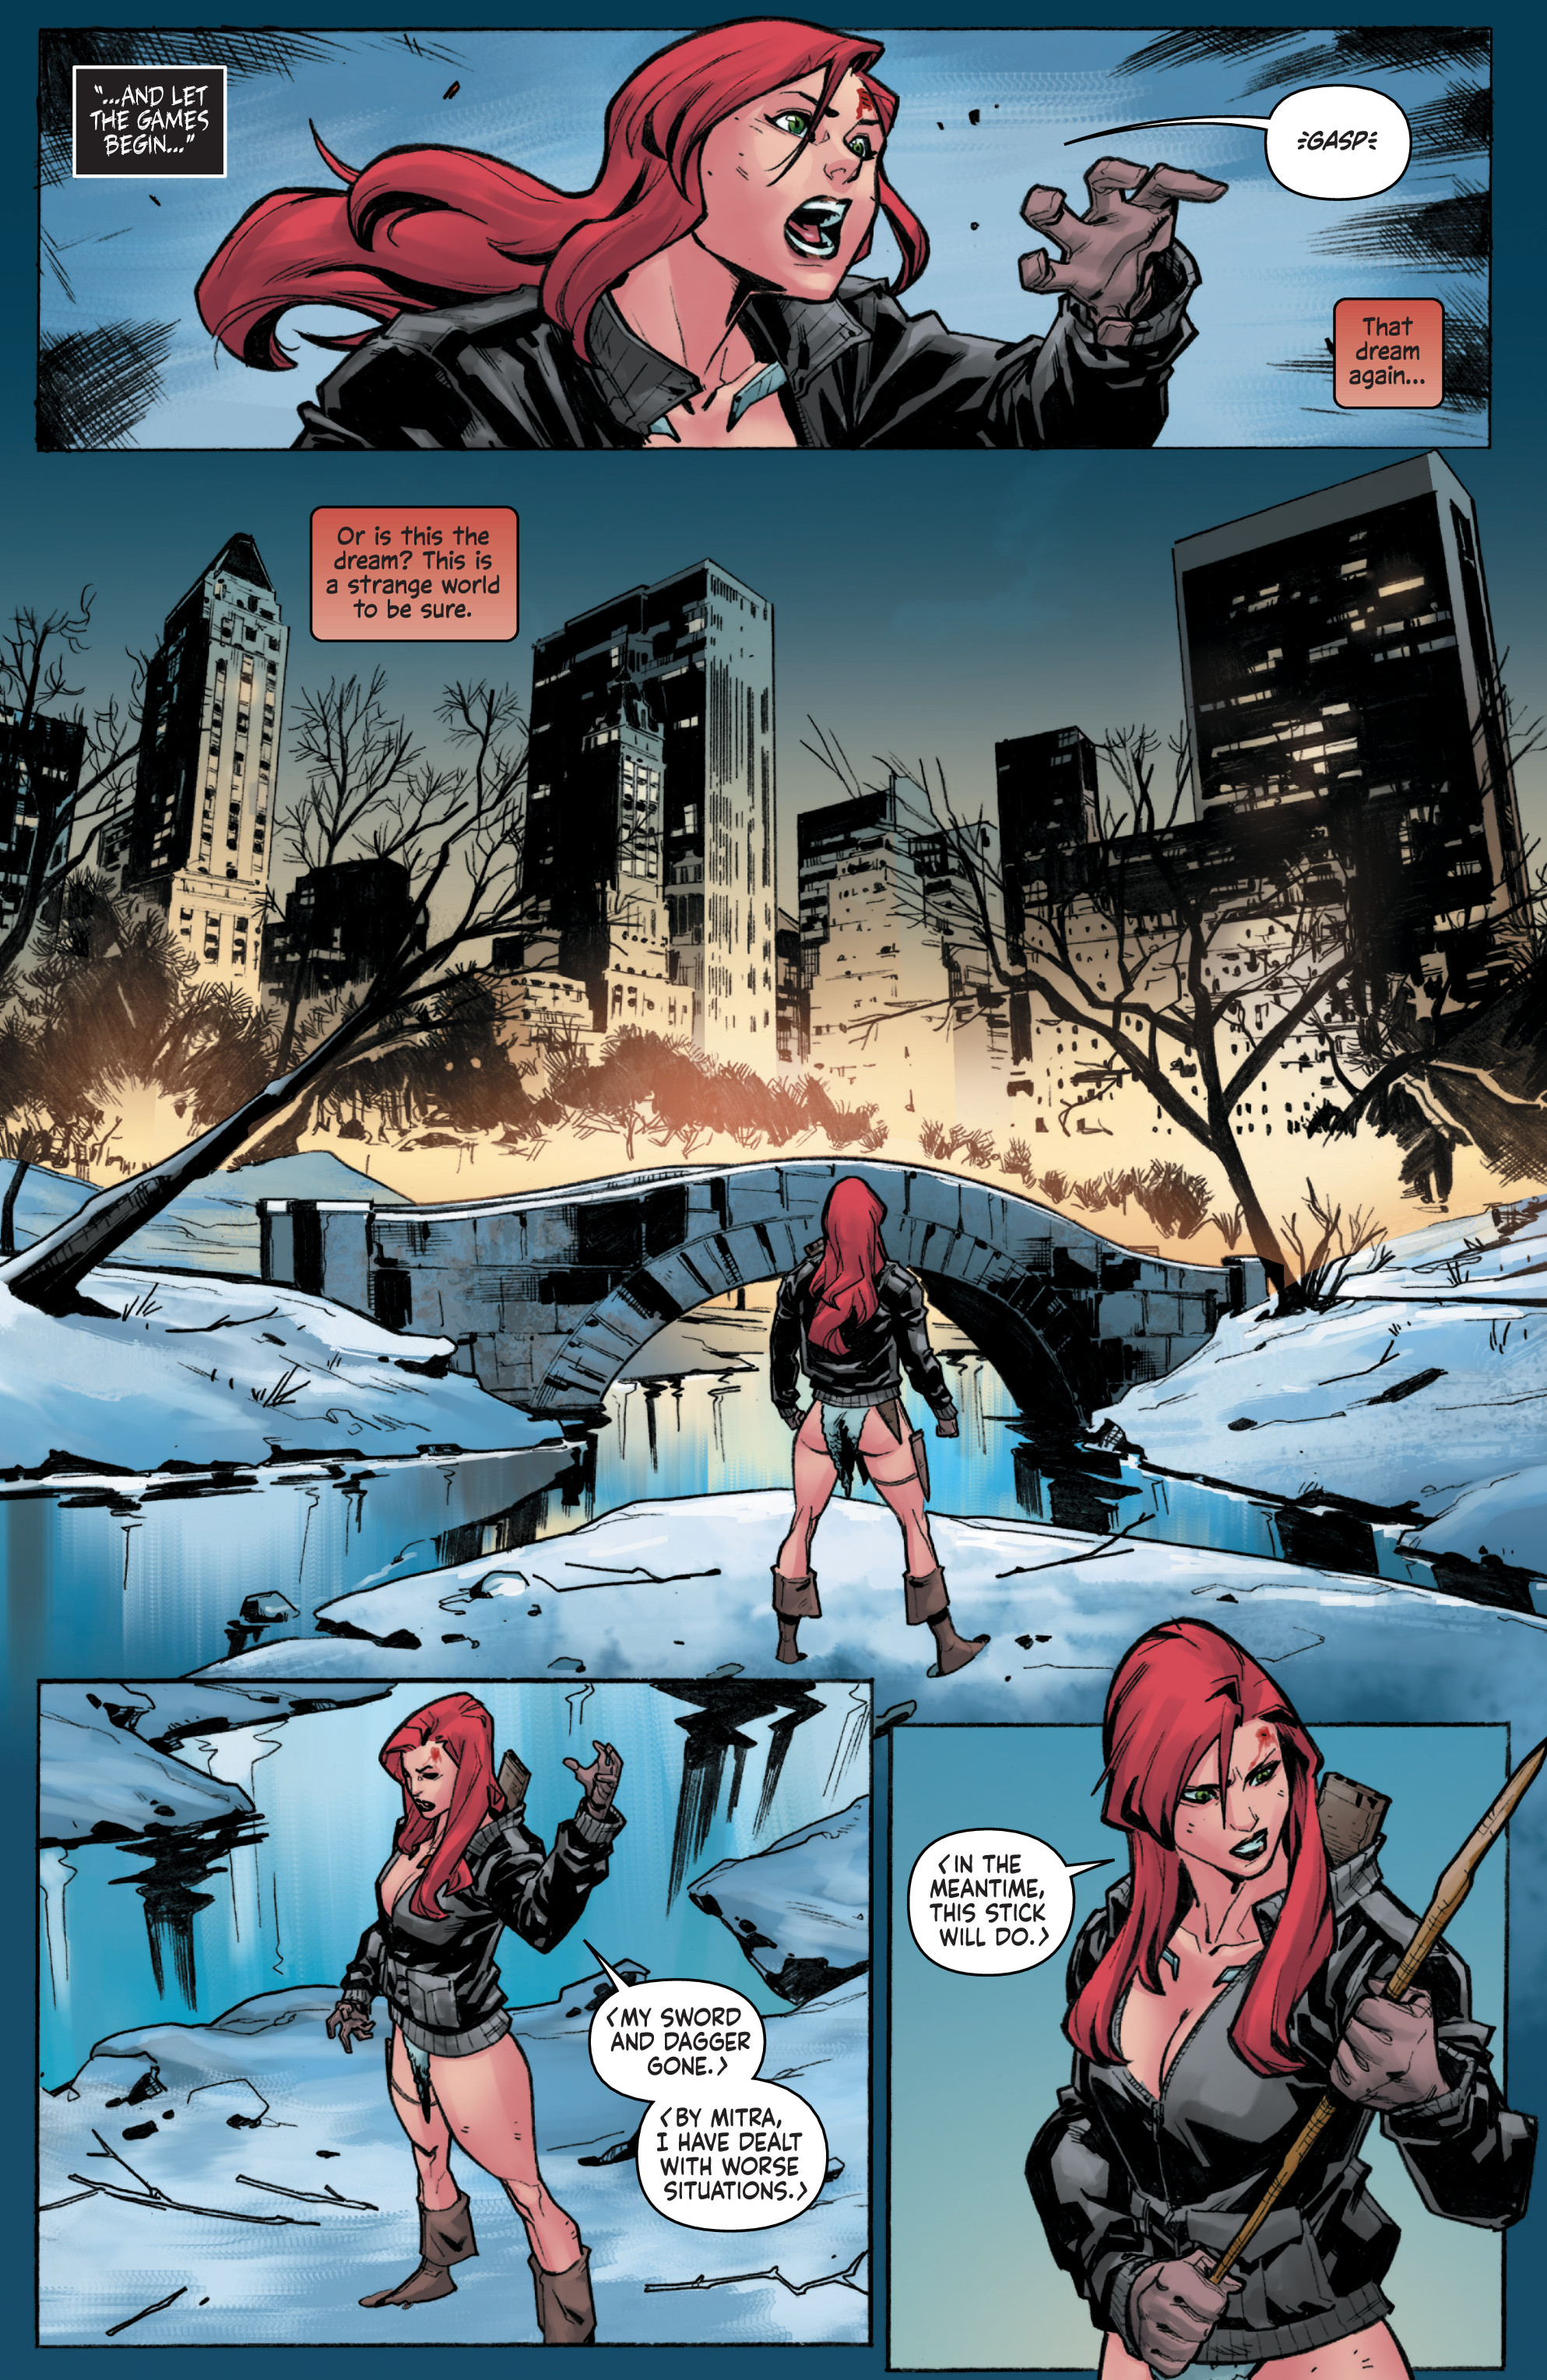 Red Sonja Vol 4 Issue 2 Read Red Sonja Vol 4 Issue 2 Comic Online In